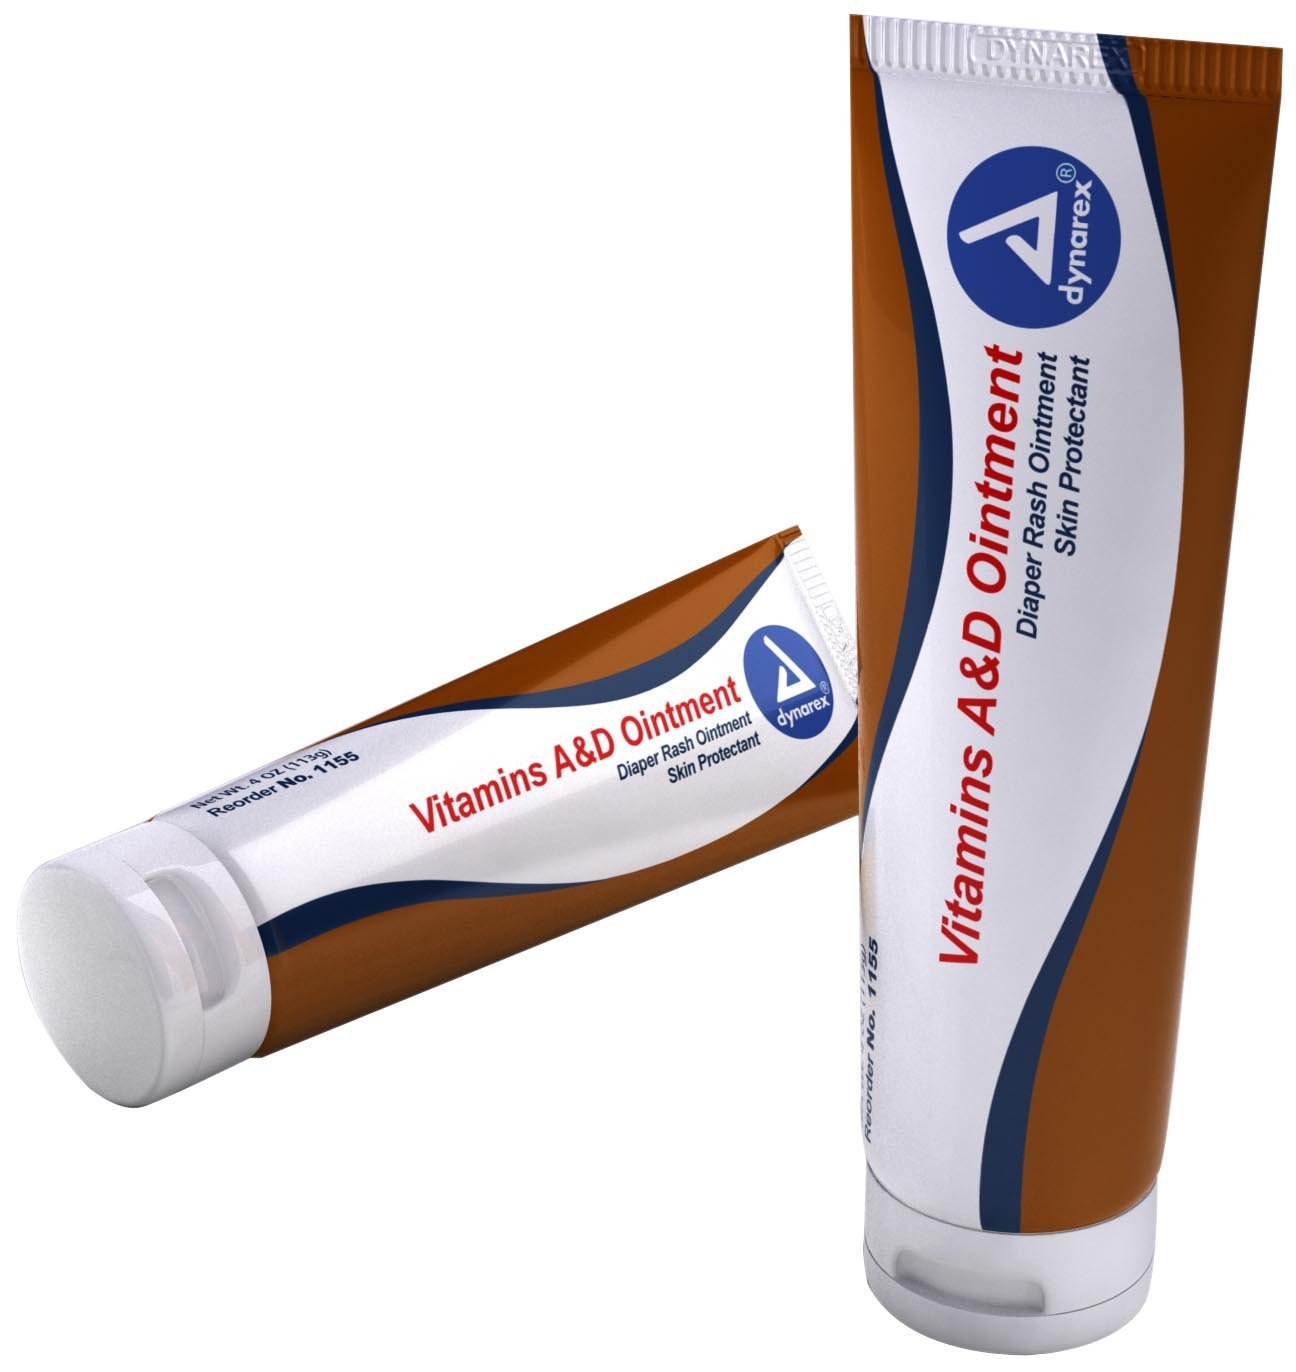 A & D Ointment 4 oz. Tube Medicinal Scent Ointment